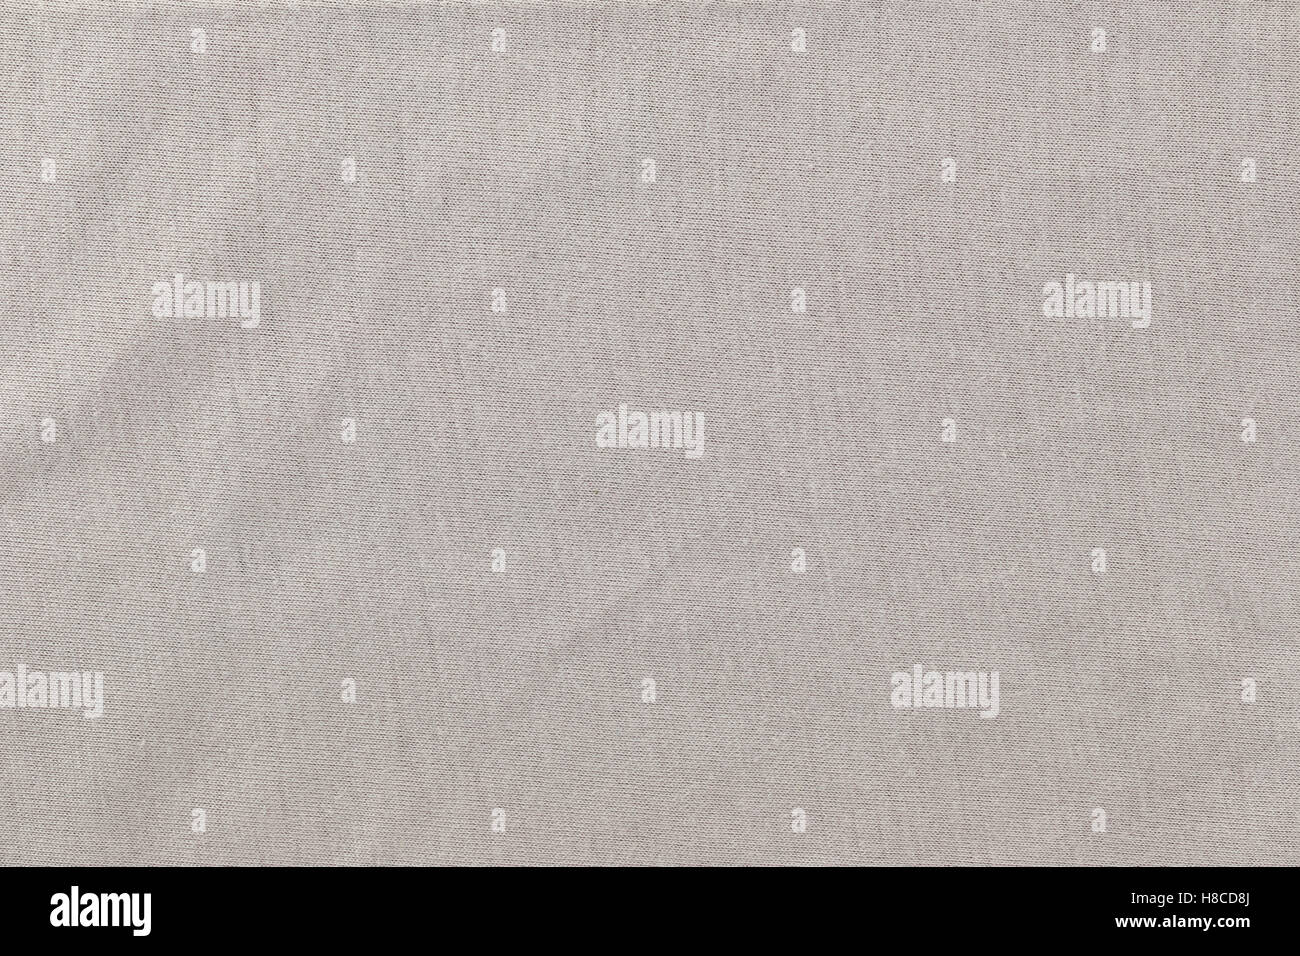 Cream color fabric texture of textiles for design abstract background ...